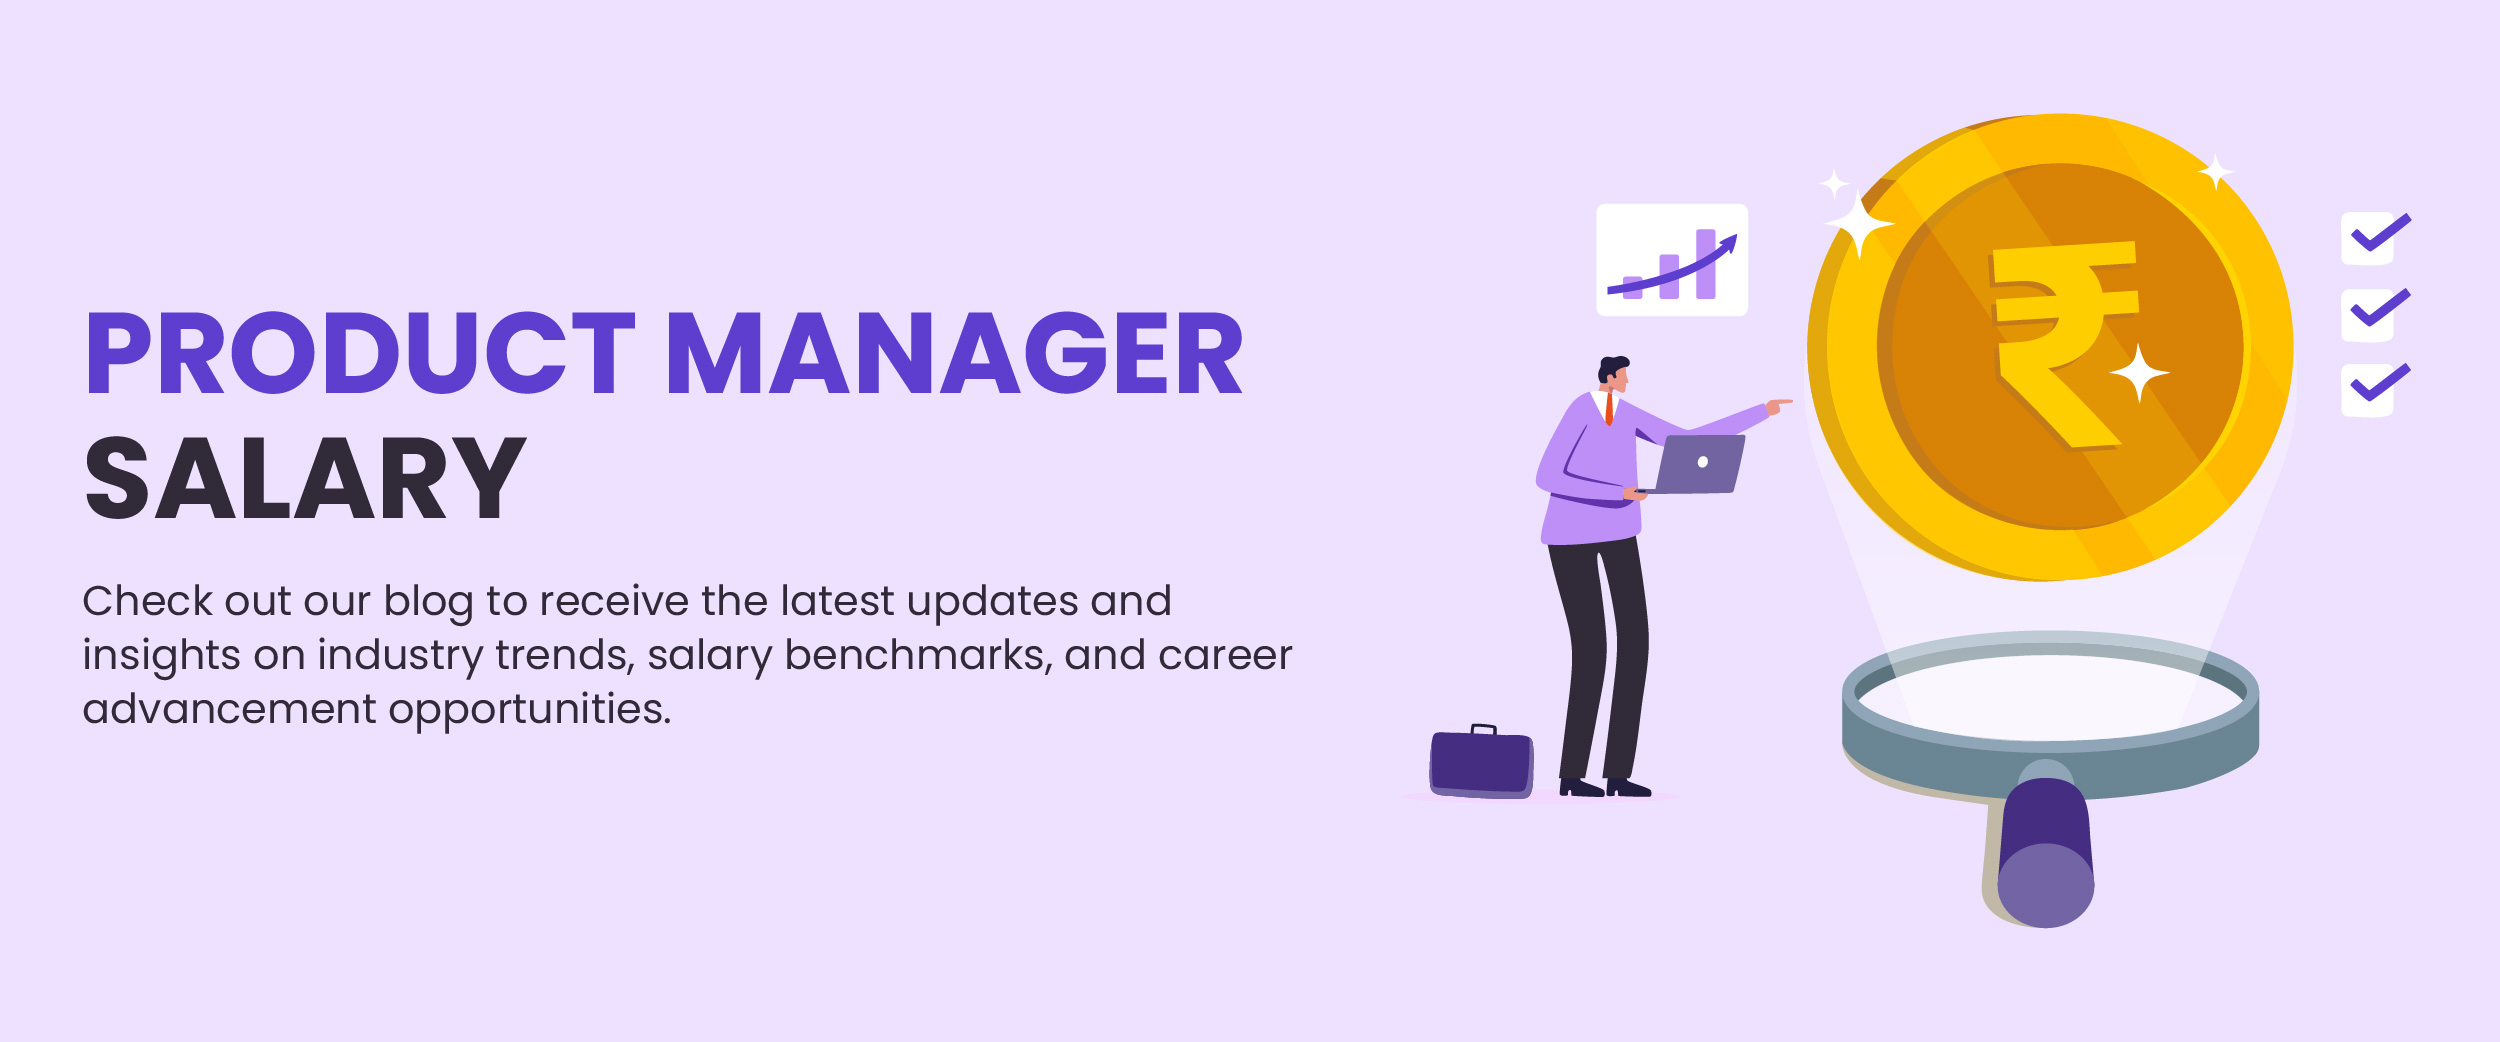 Product Manager Salary in india